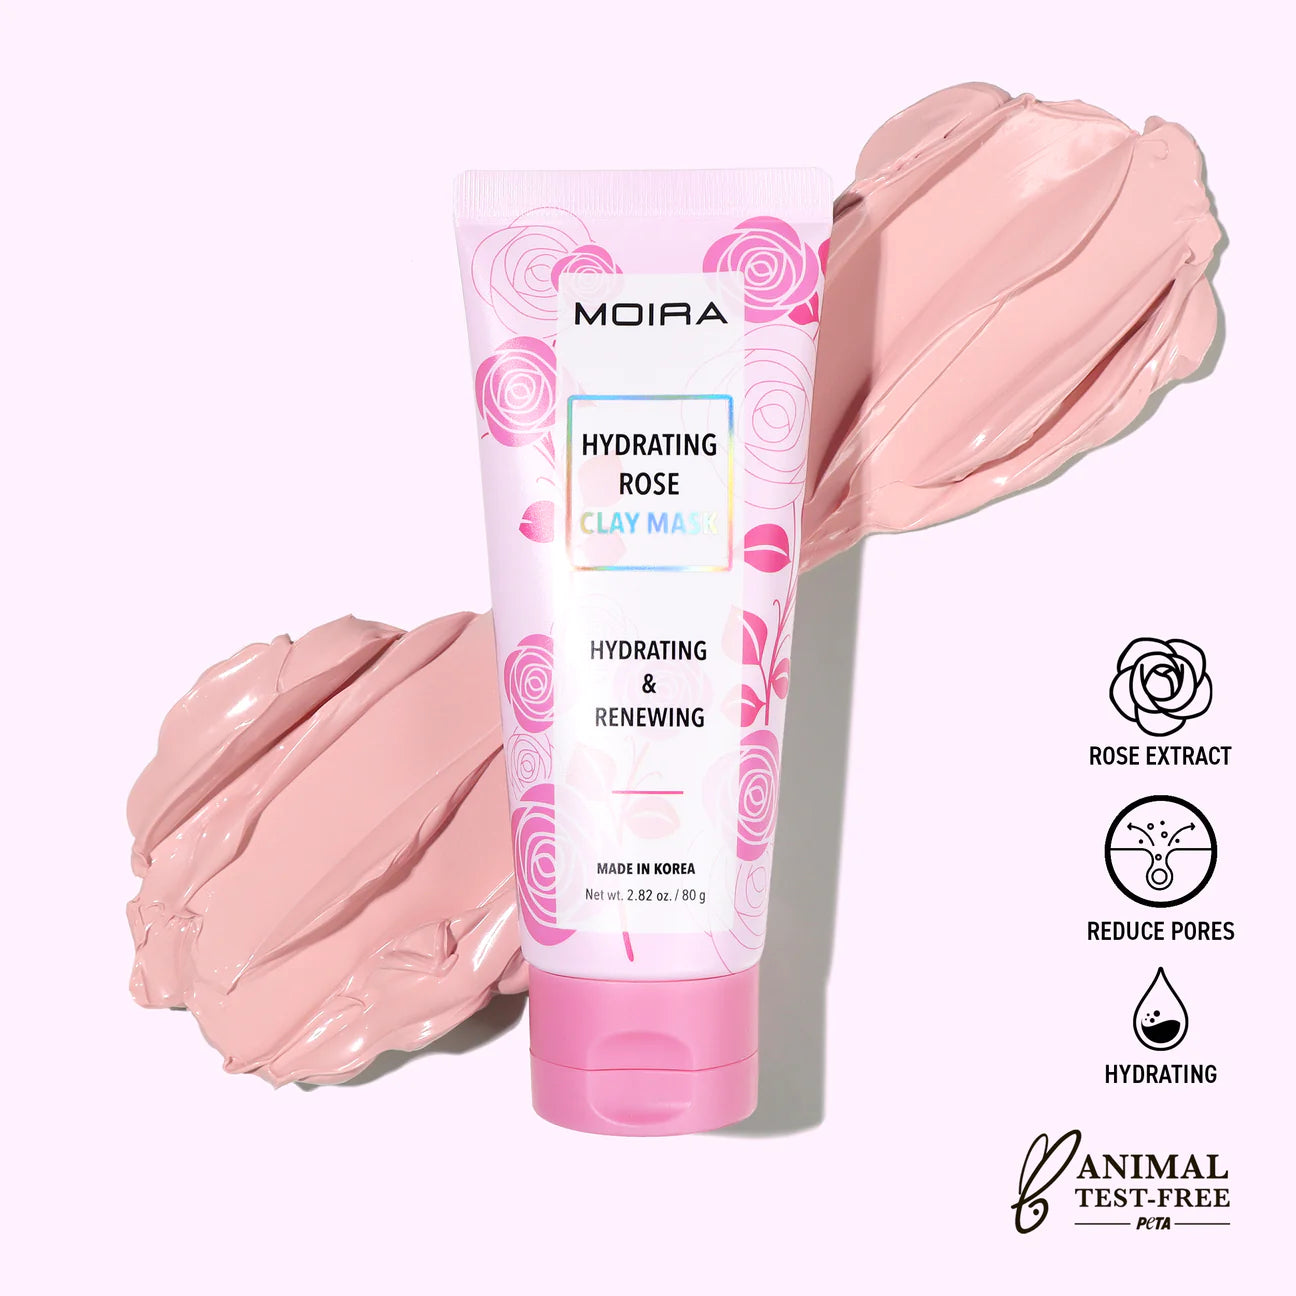 MOIRA Hydrating Rose Clay Mask